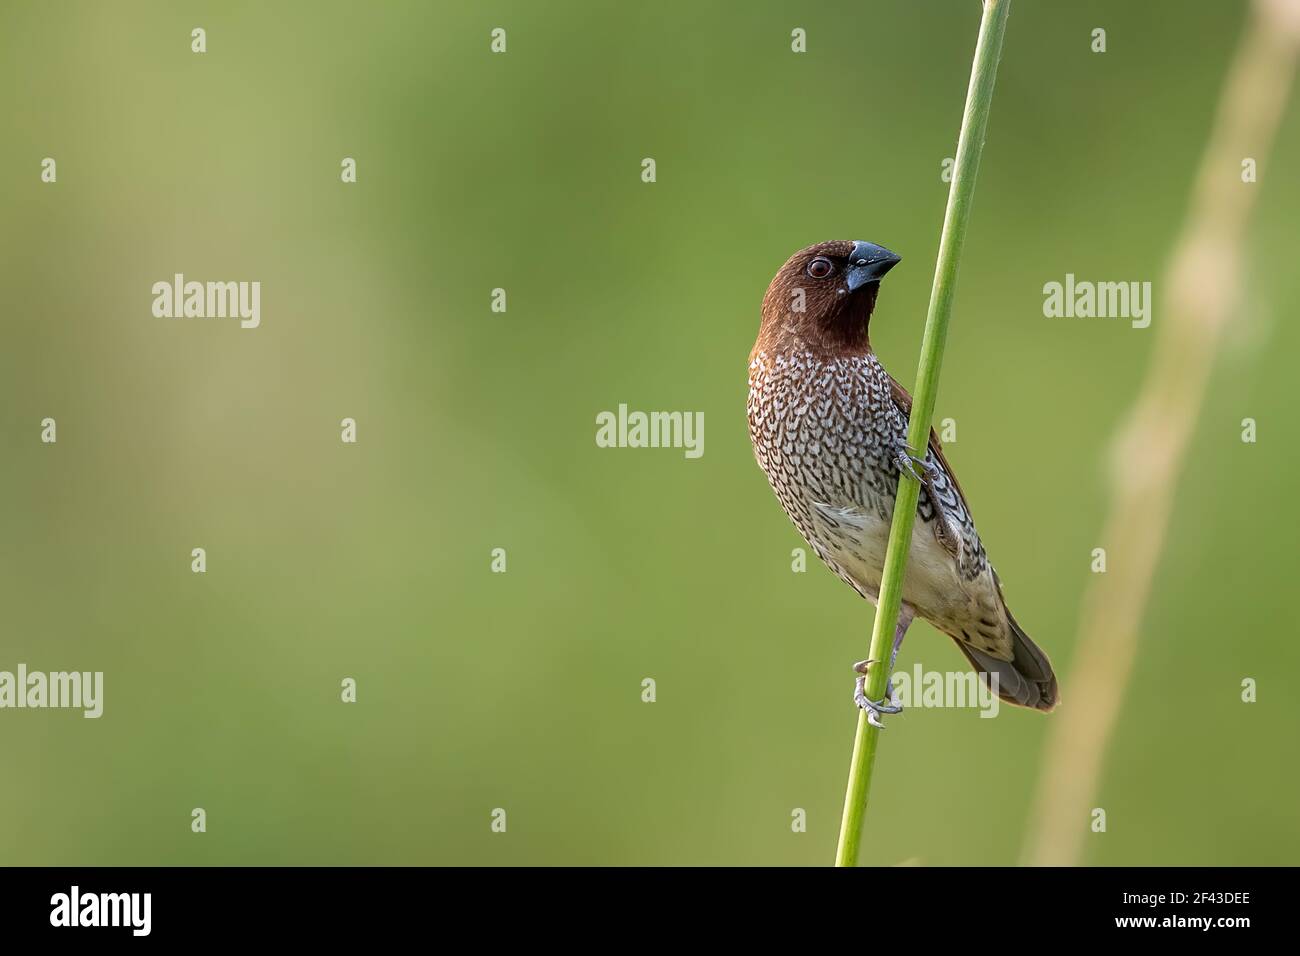 The scaly-breasted munia or spotted munia (Lonchura punctulata), is a sparrow-sized estrildid finch native to tropical Asia. Stock Photo